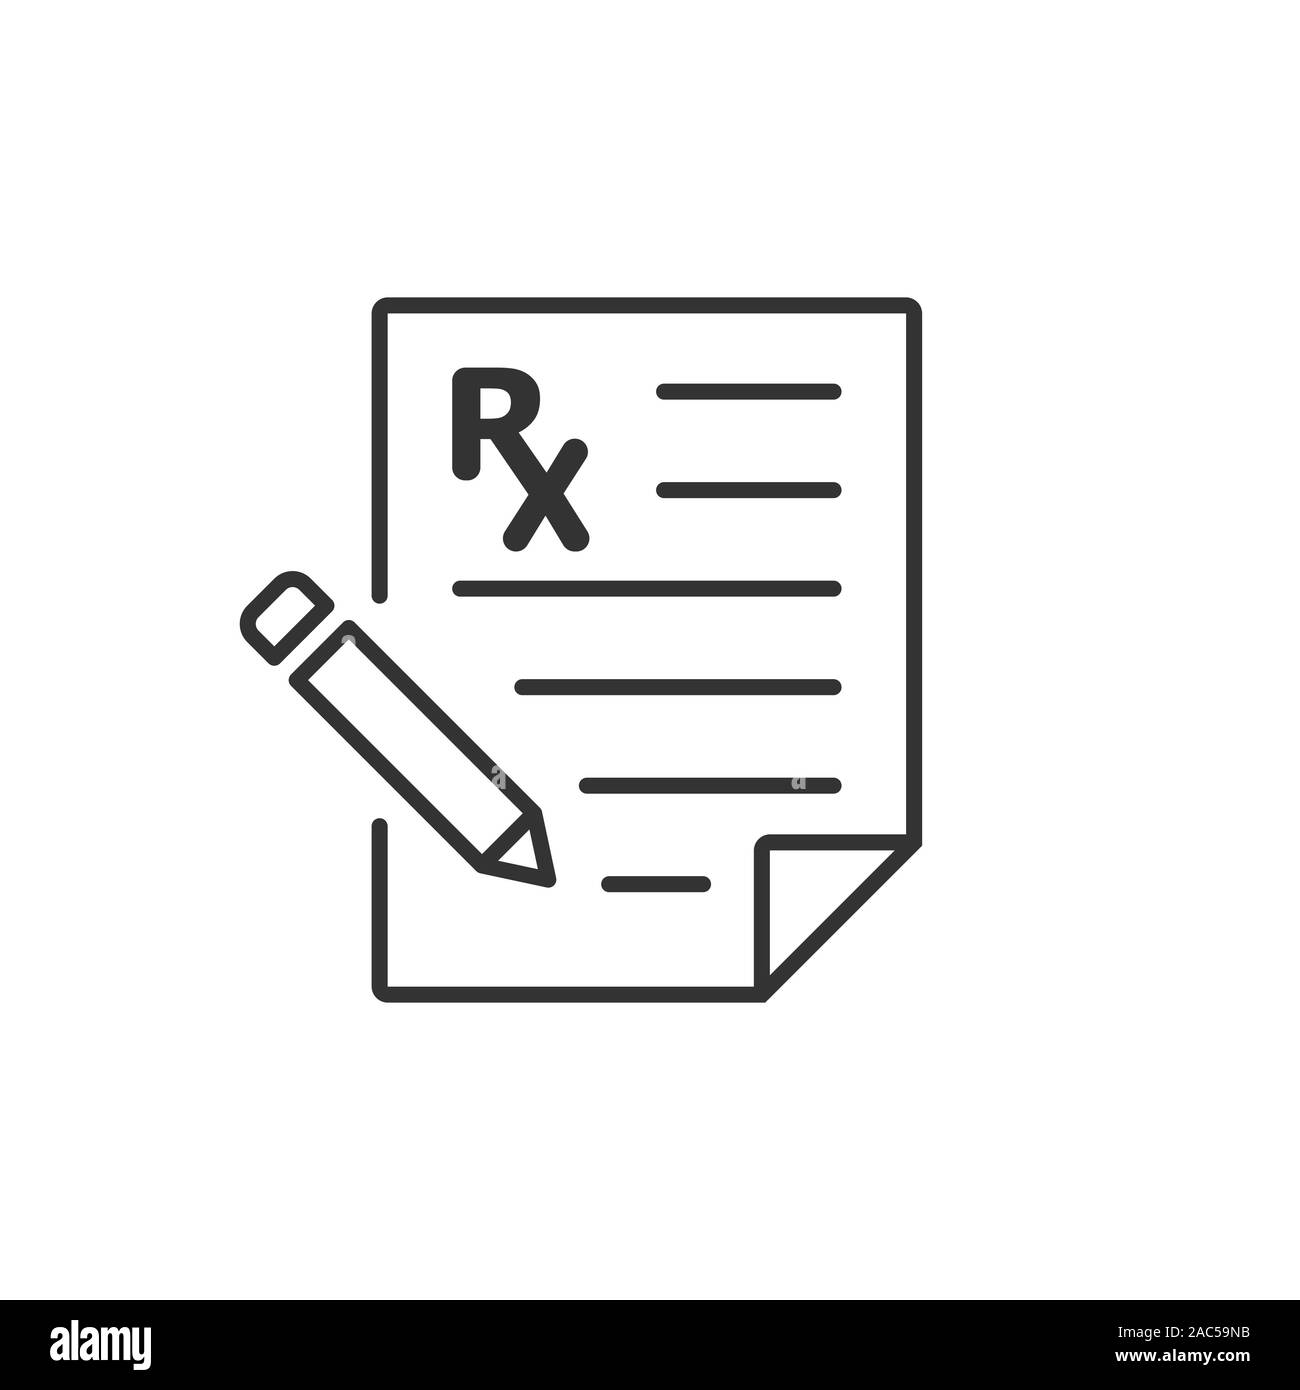 Prescription icon in flat style. Rx document vector illustration on white isolated background. Paper business concept. Stock Vector